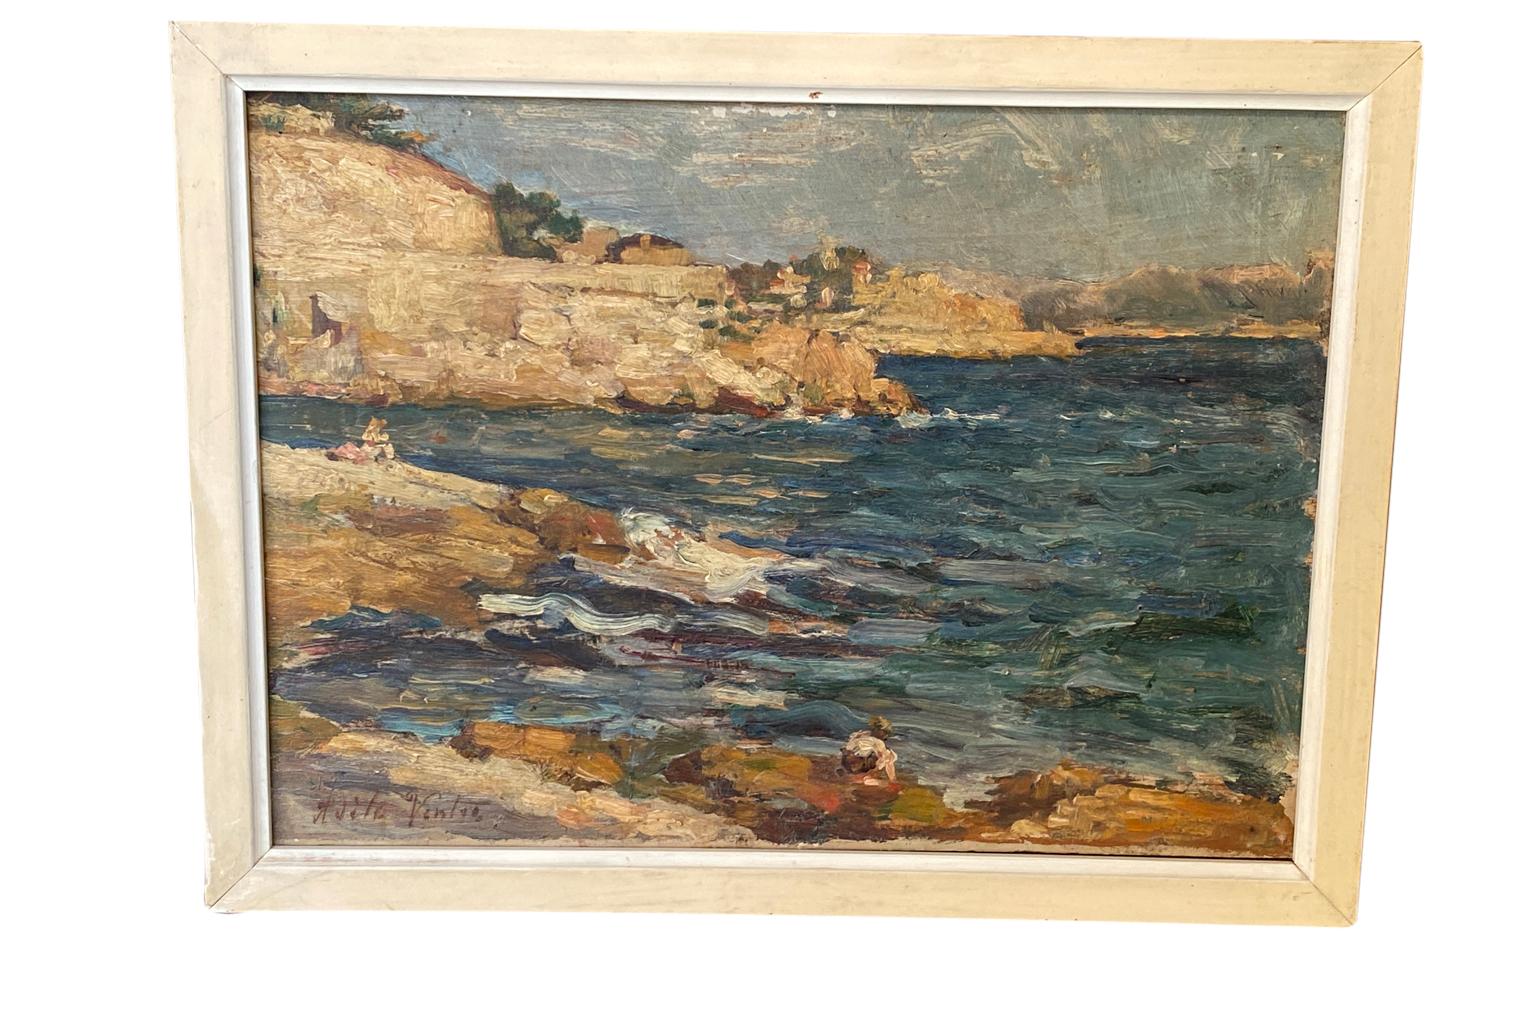 A charming pair of early 20th century oil on board paintings of the Calanque De Marseille. Wonderful color and brushwork. Housed in handsome frames. One painting measures 10 3/4